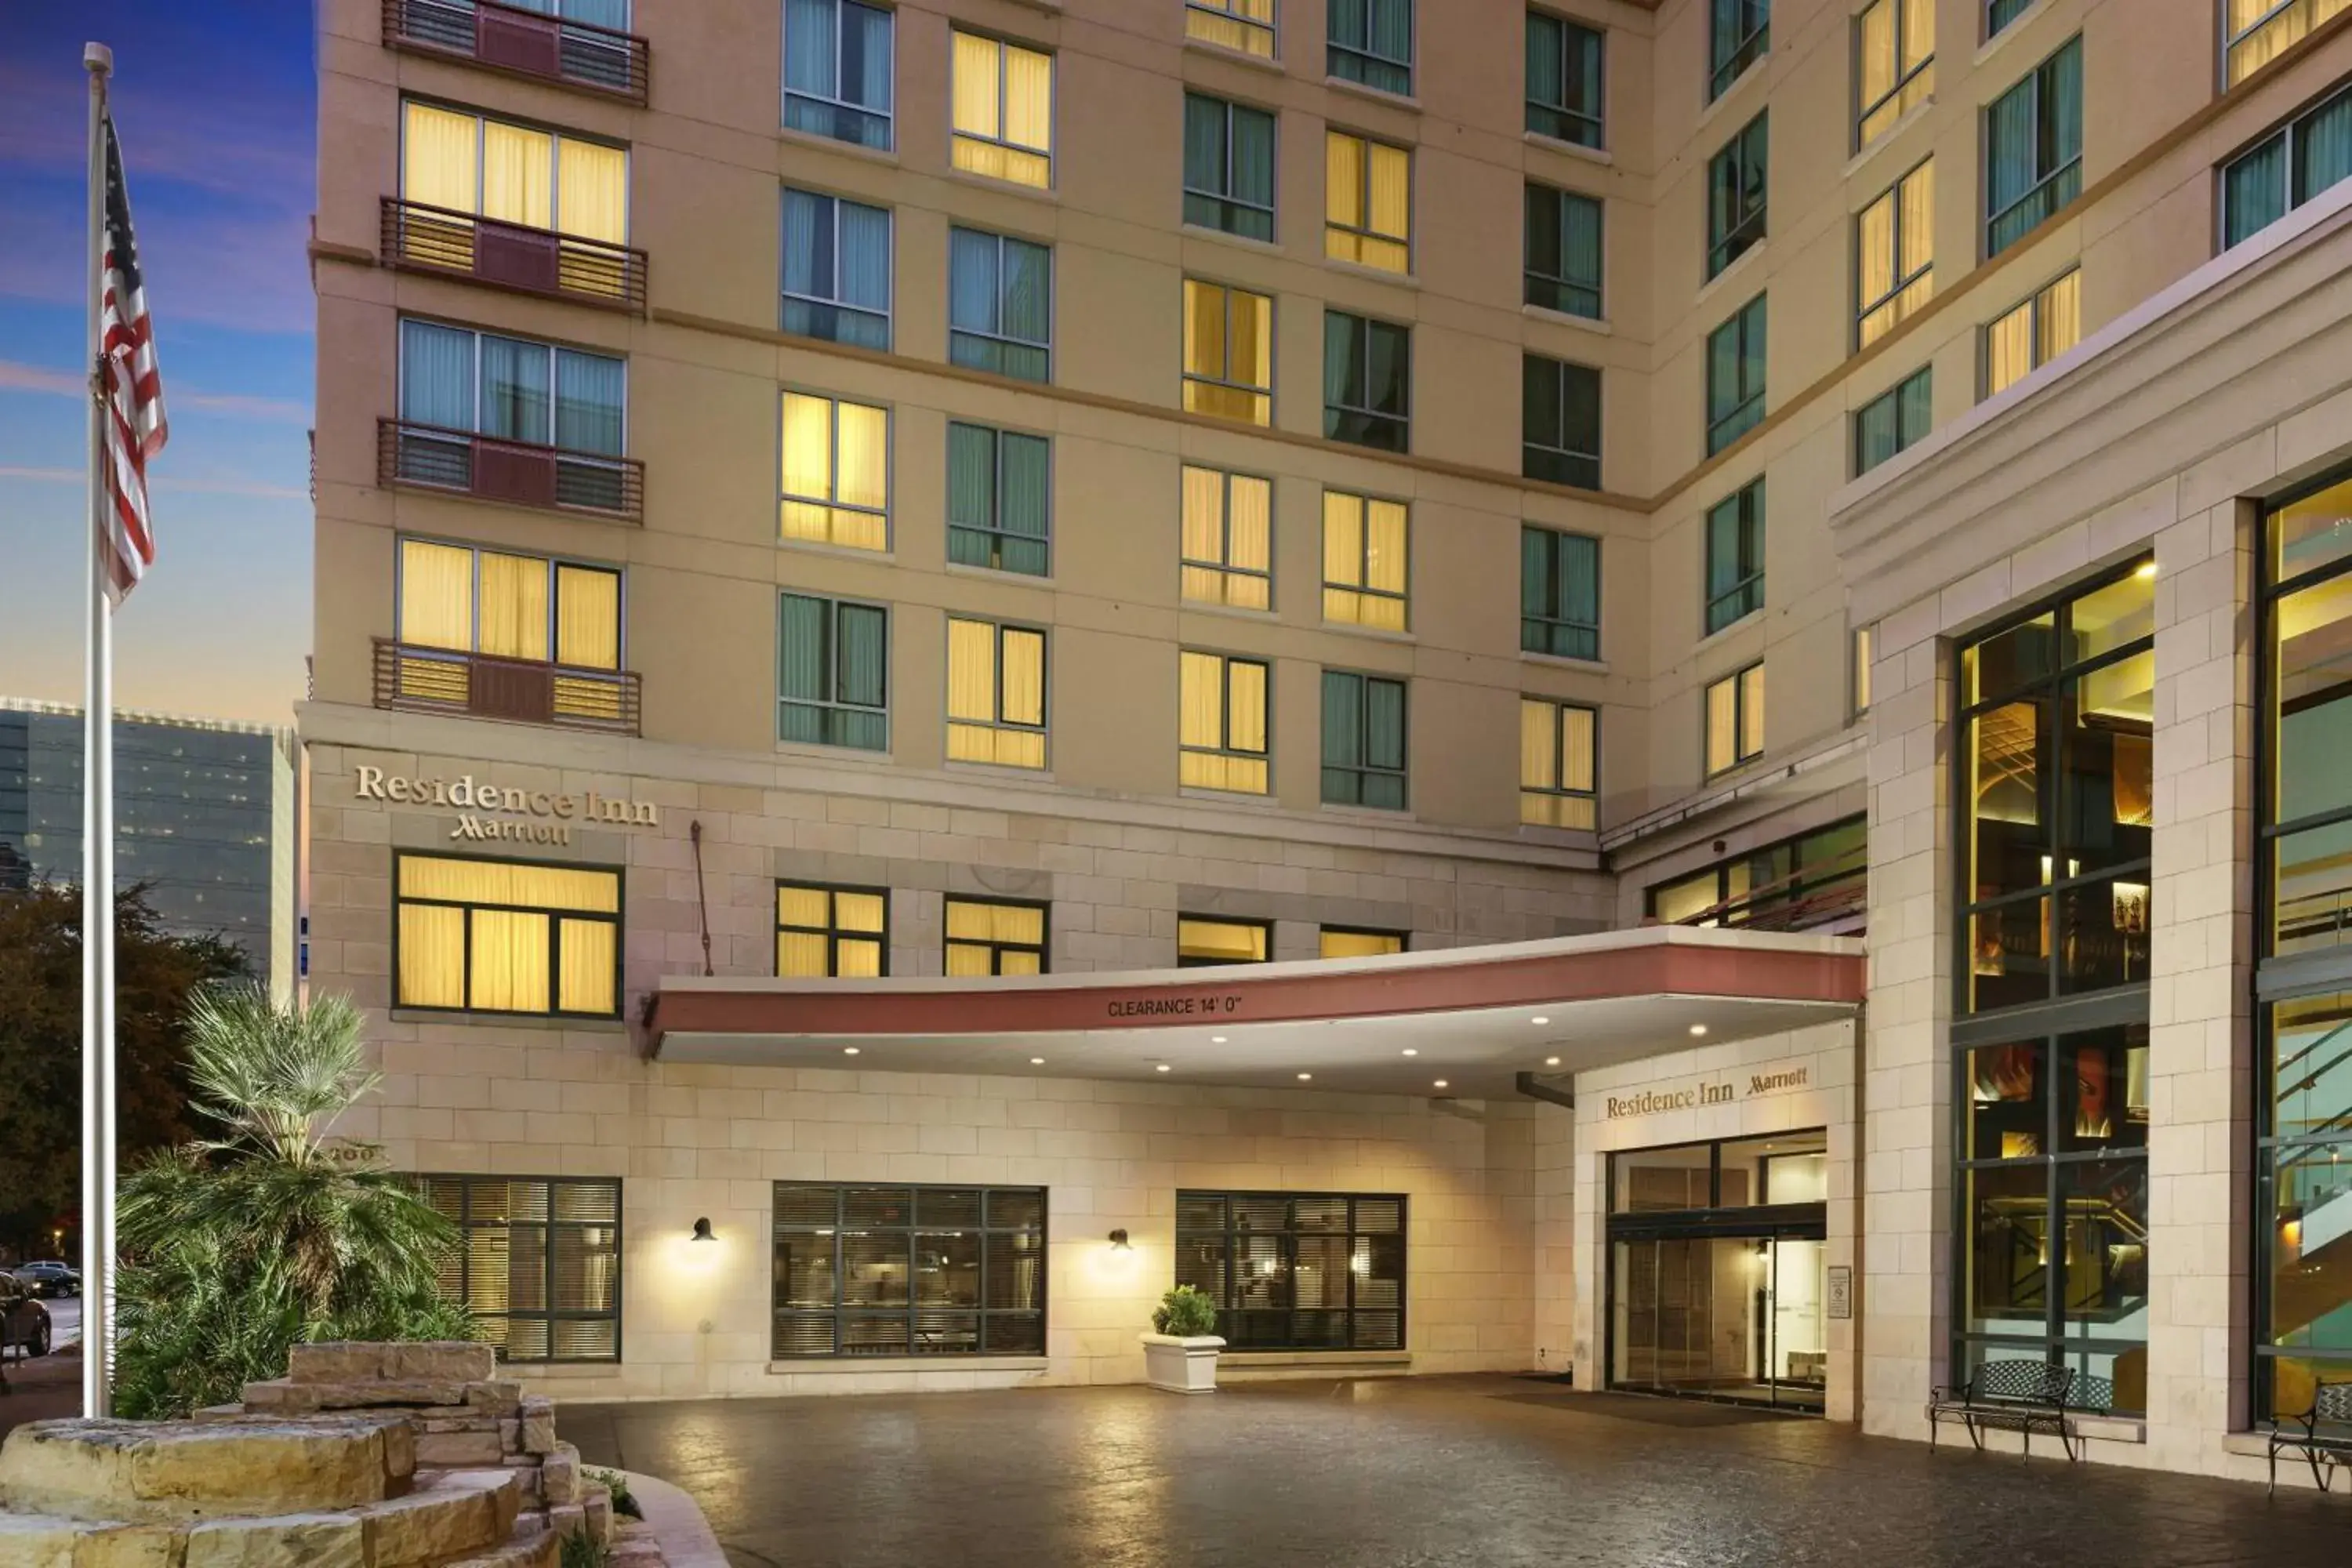 Property Building in Residence Inn Austin Downtown / Convention Center